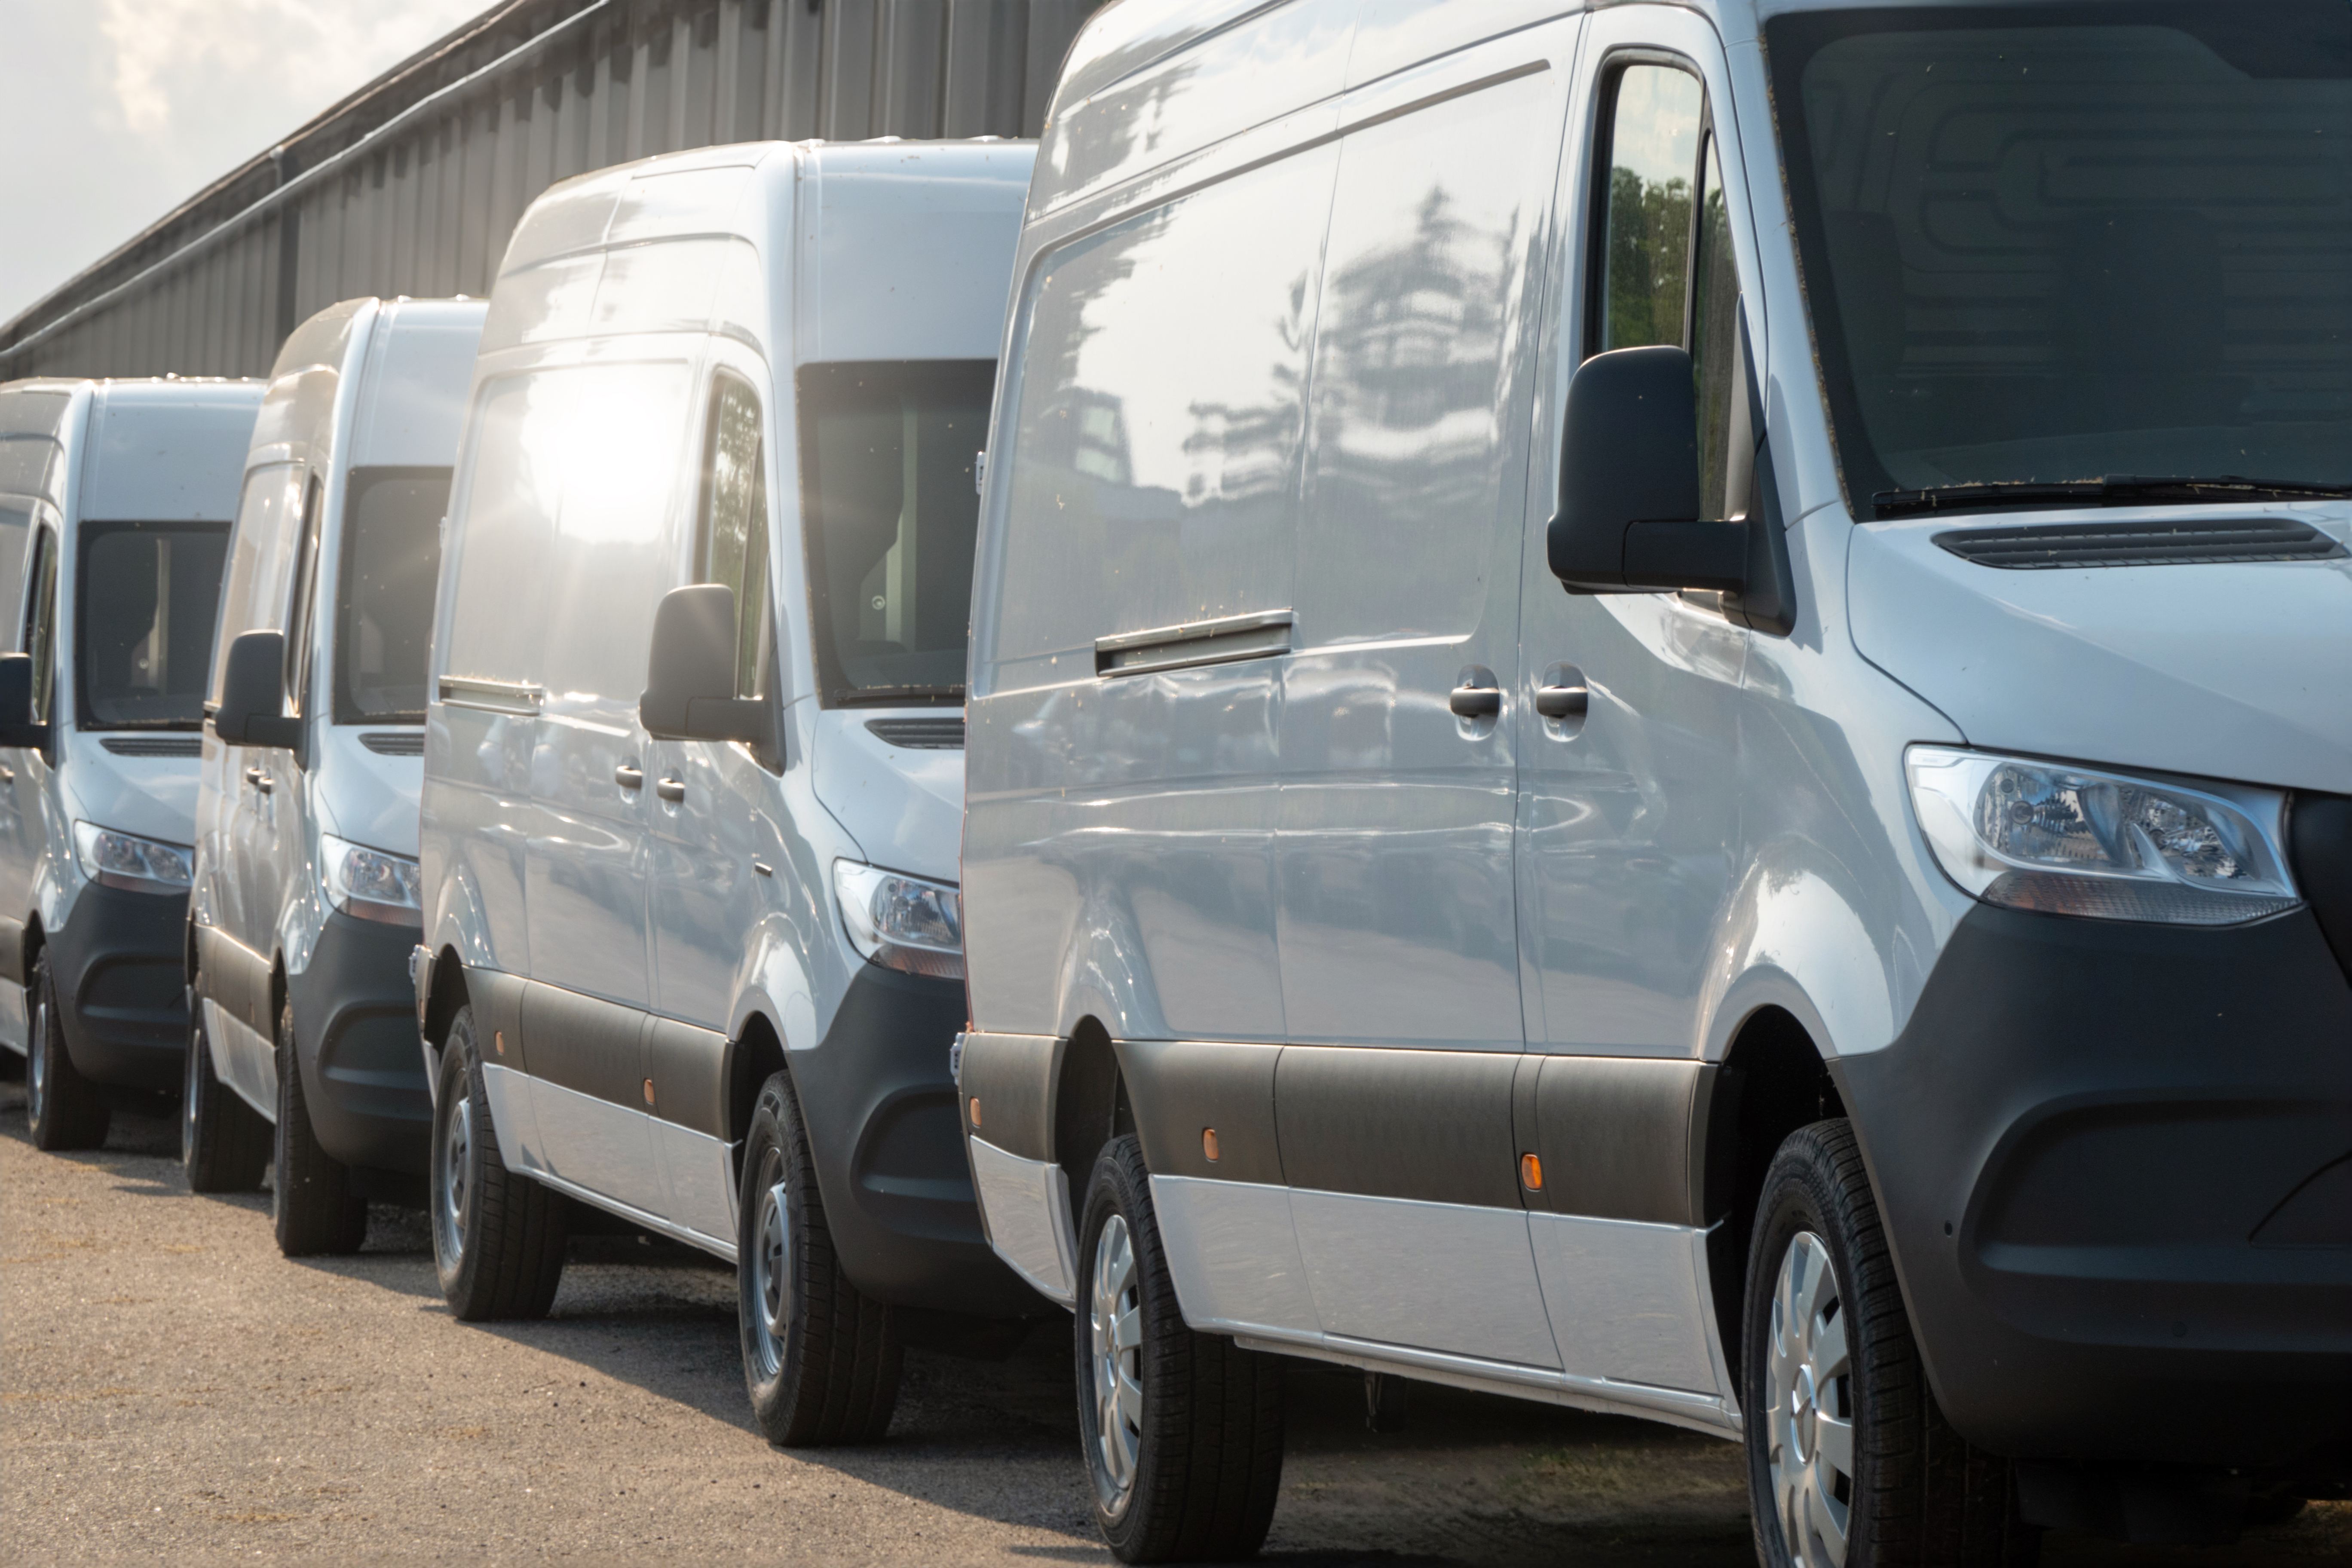 ZEV Puts Commercial Fleets Just One Capital Cycle Away From Zero-Emissions Deadlines